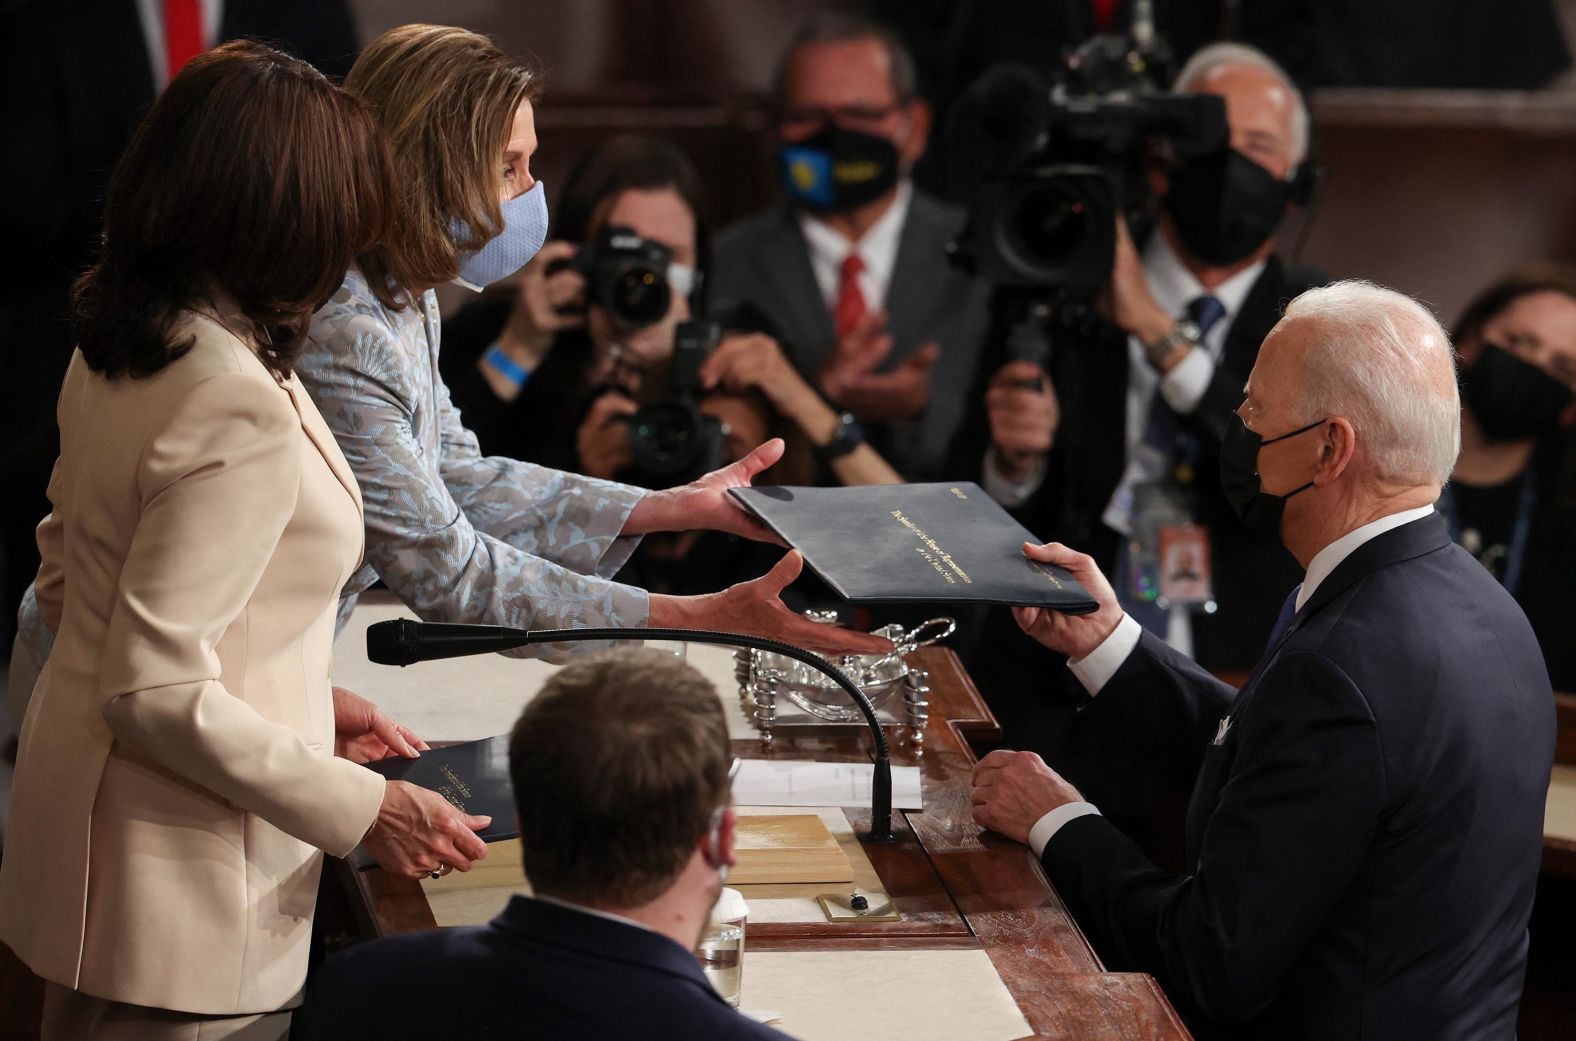 Biden hands a copy of his speech to Pelosi before he started it.